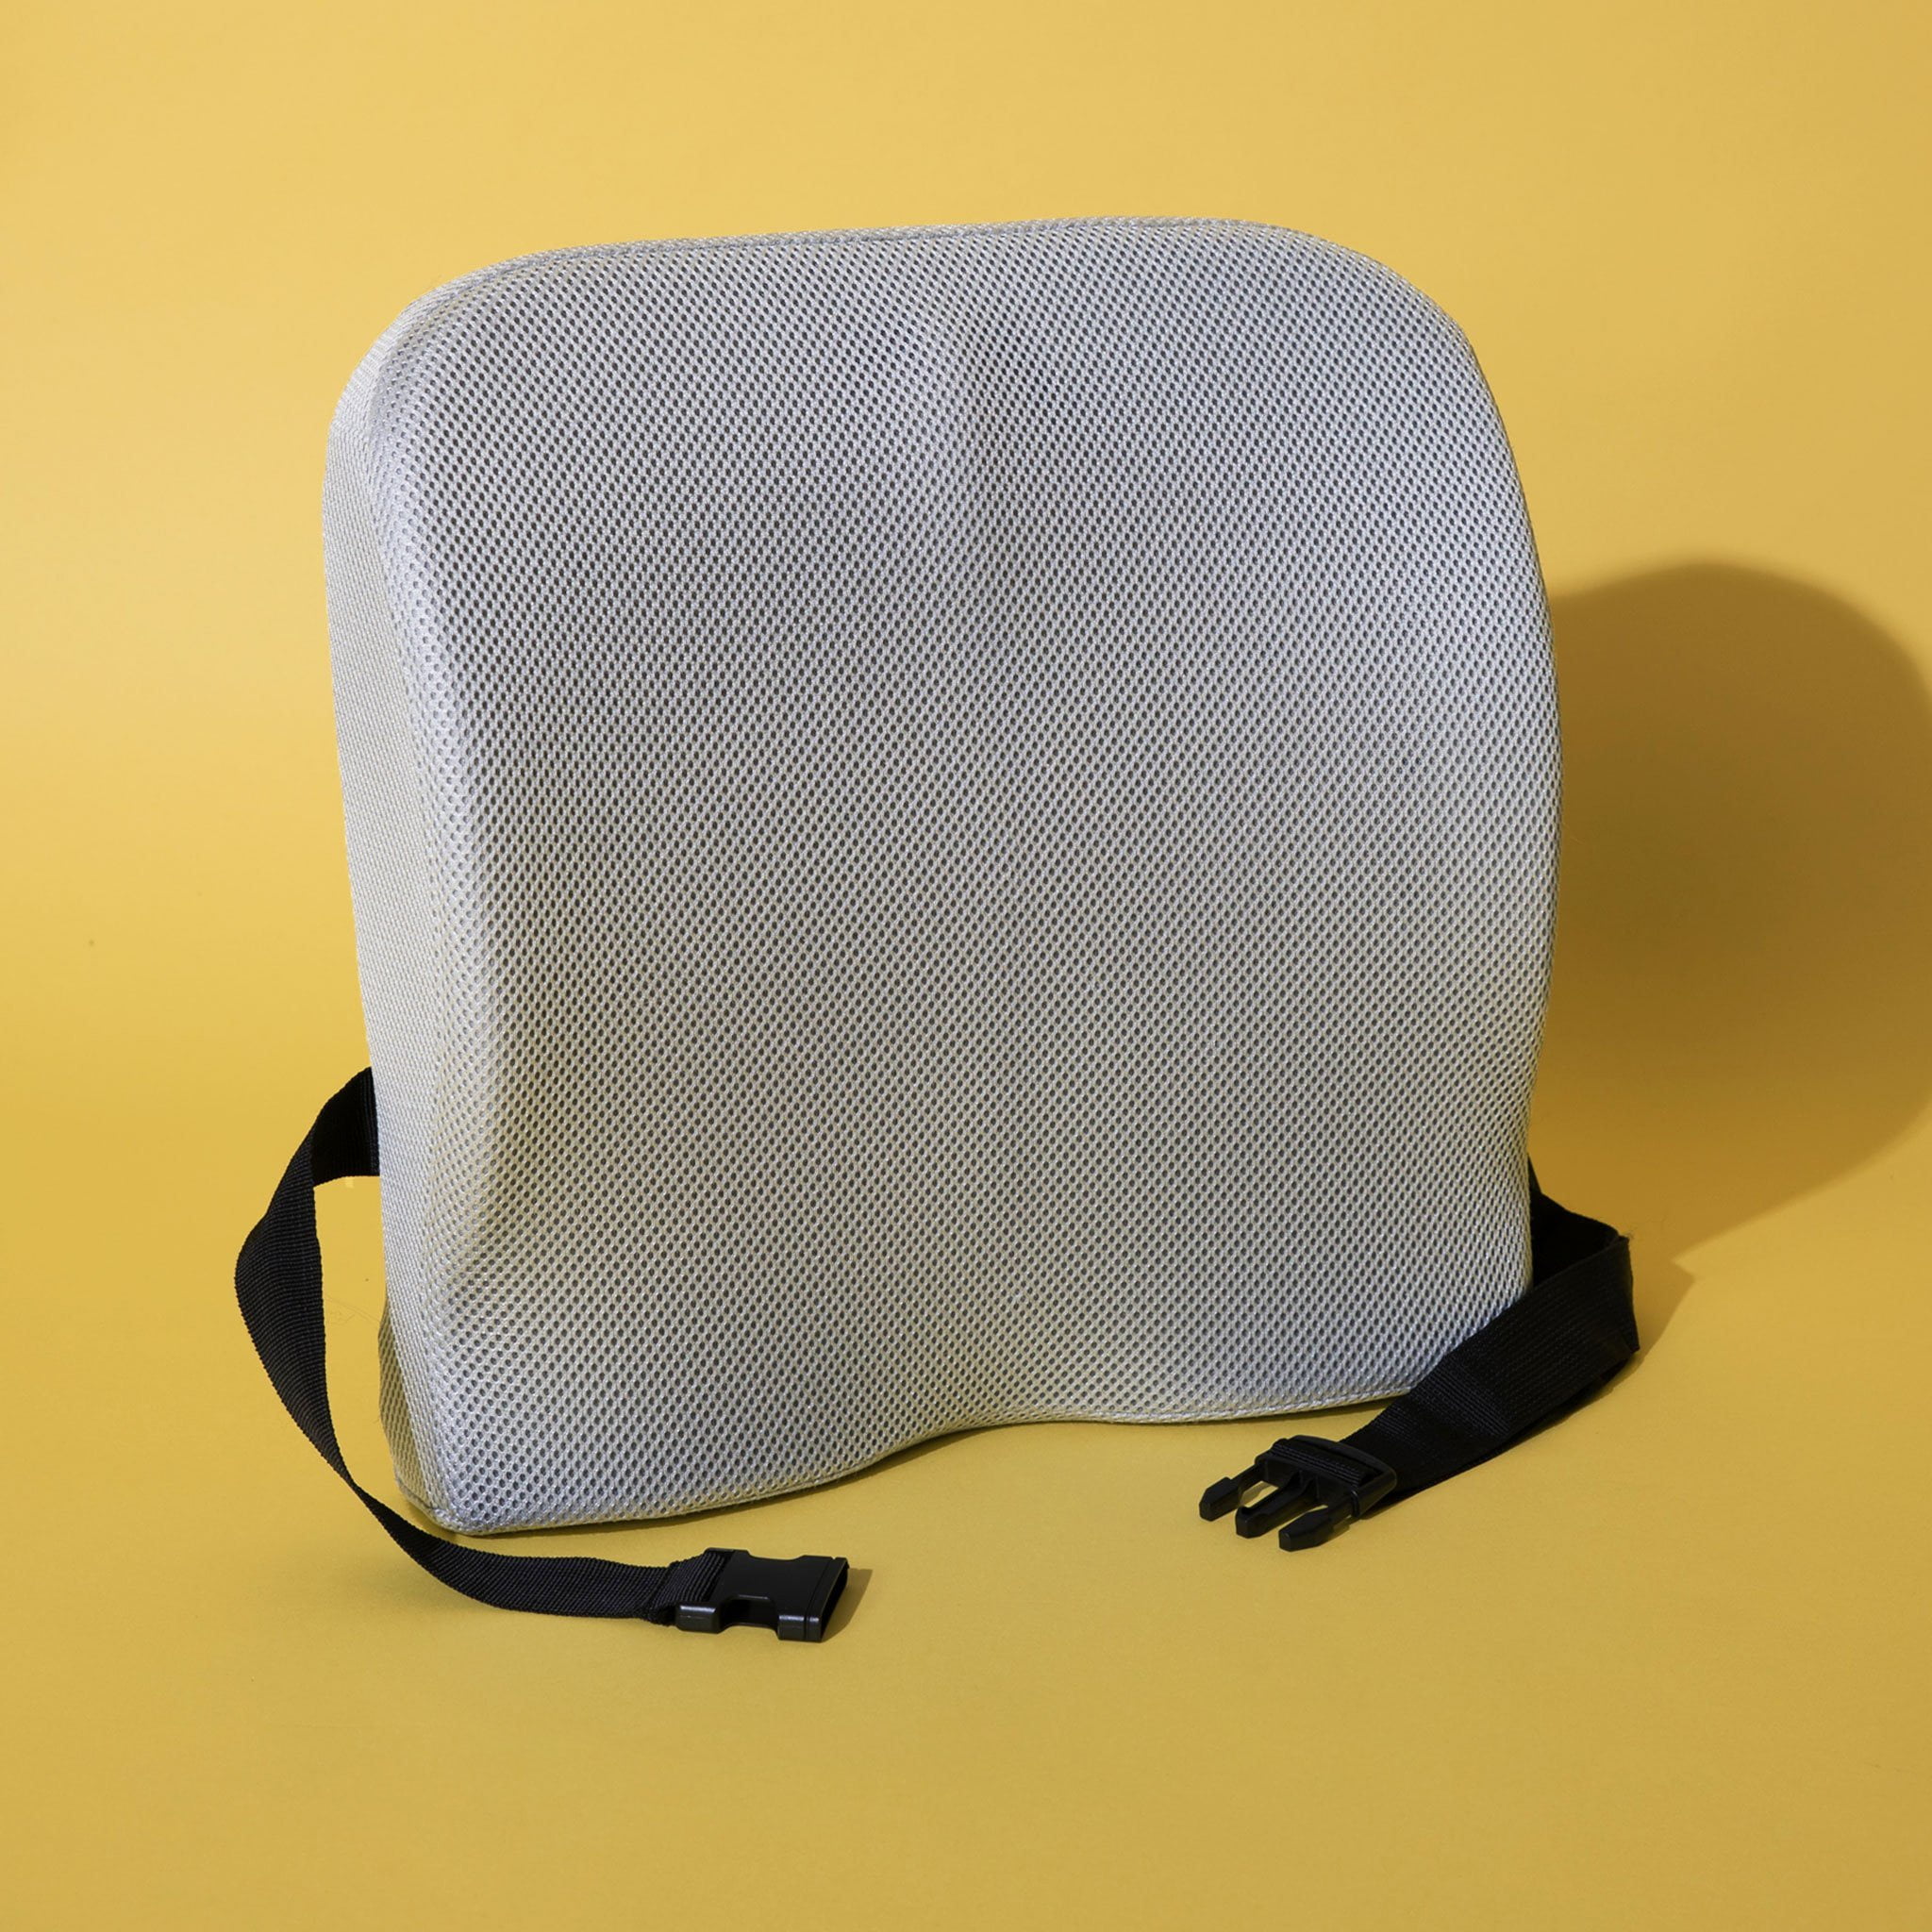 Lumbar Support Cushion for OMP Seat, Small, specify color